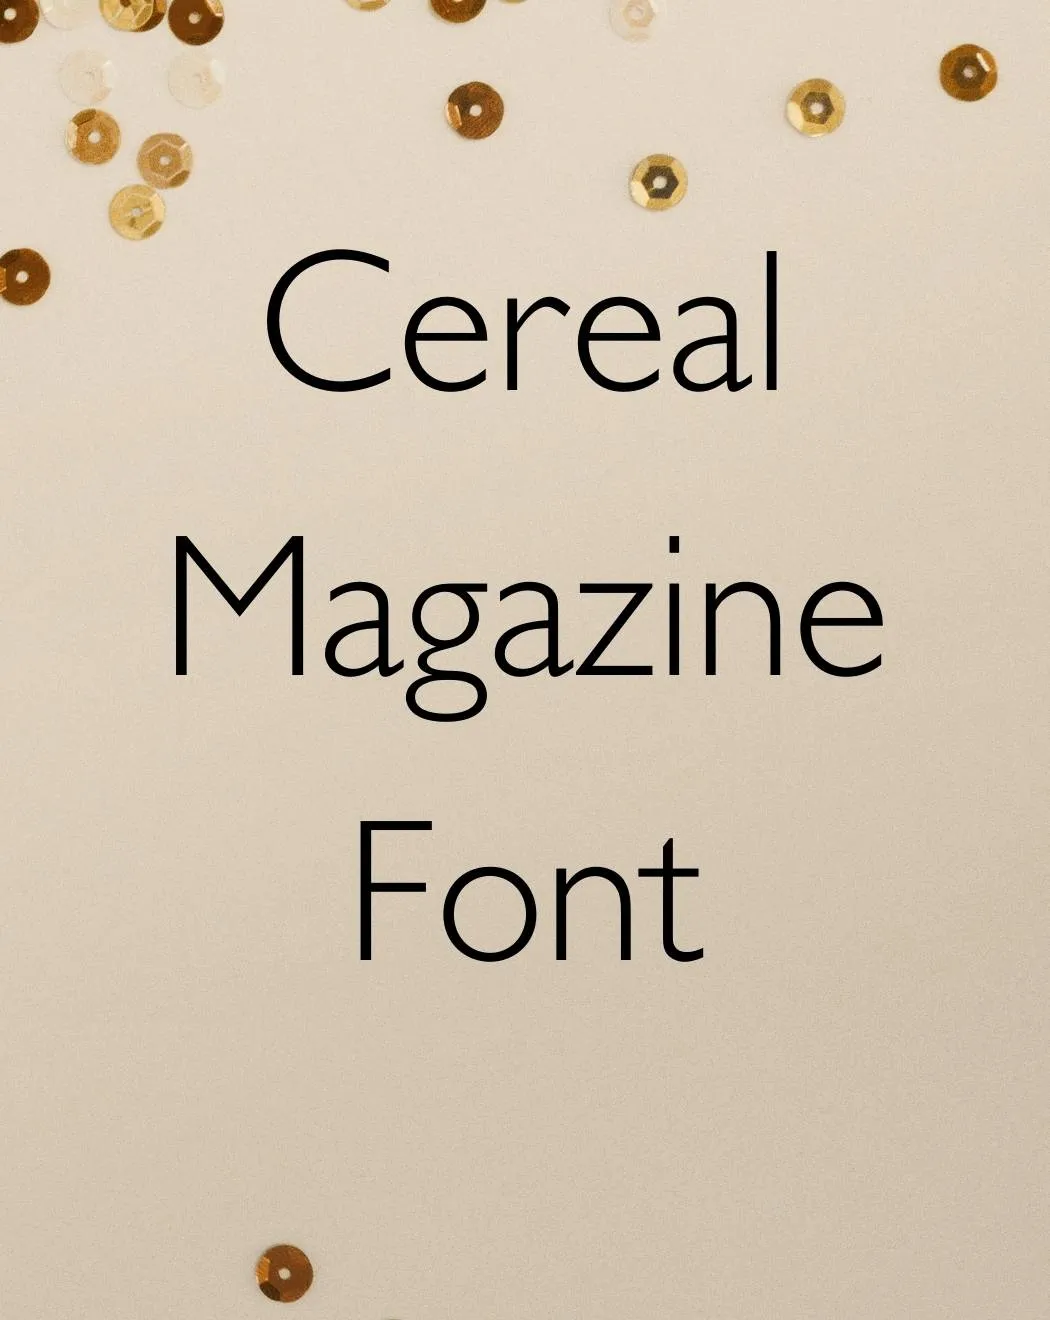 Cereal Magazine Font Free Download